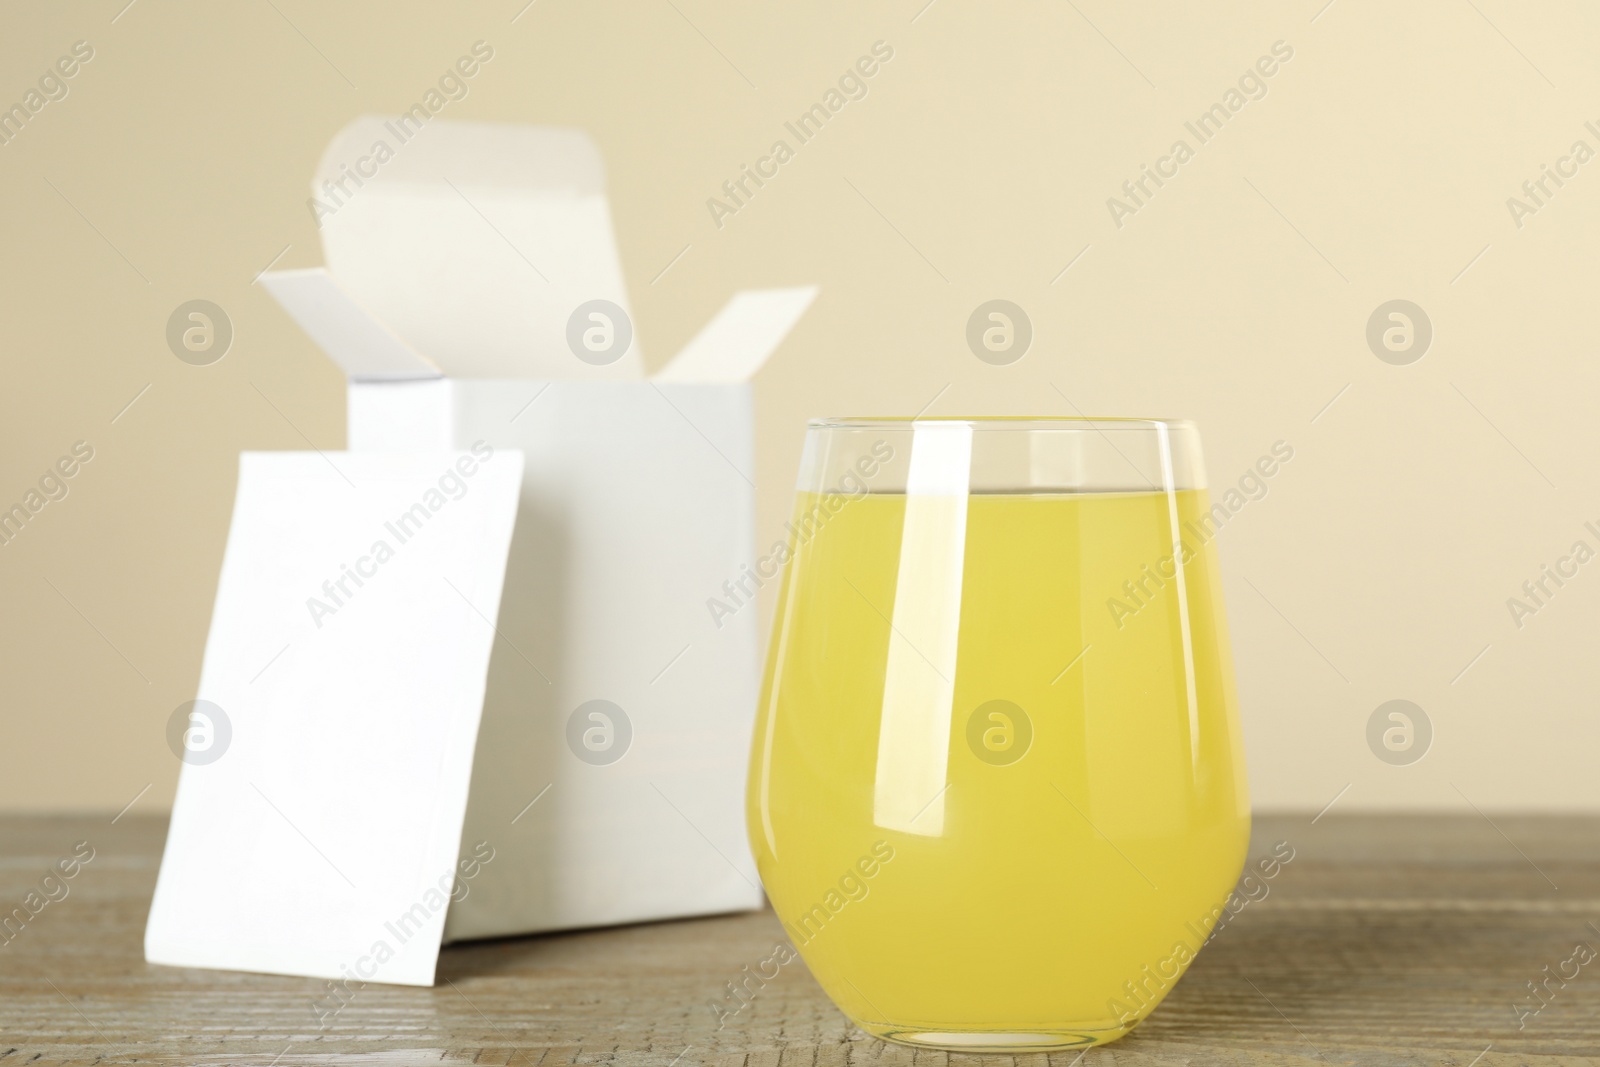 Photo of Glass with dissolved drug and medicine sachet on wooden table